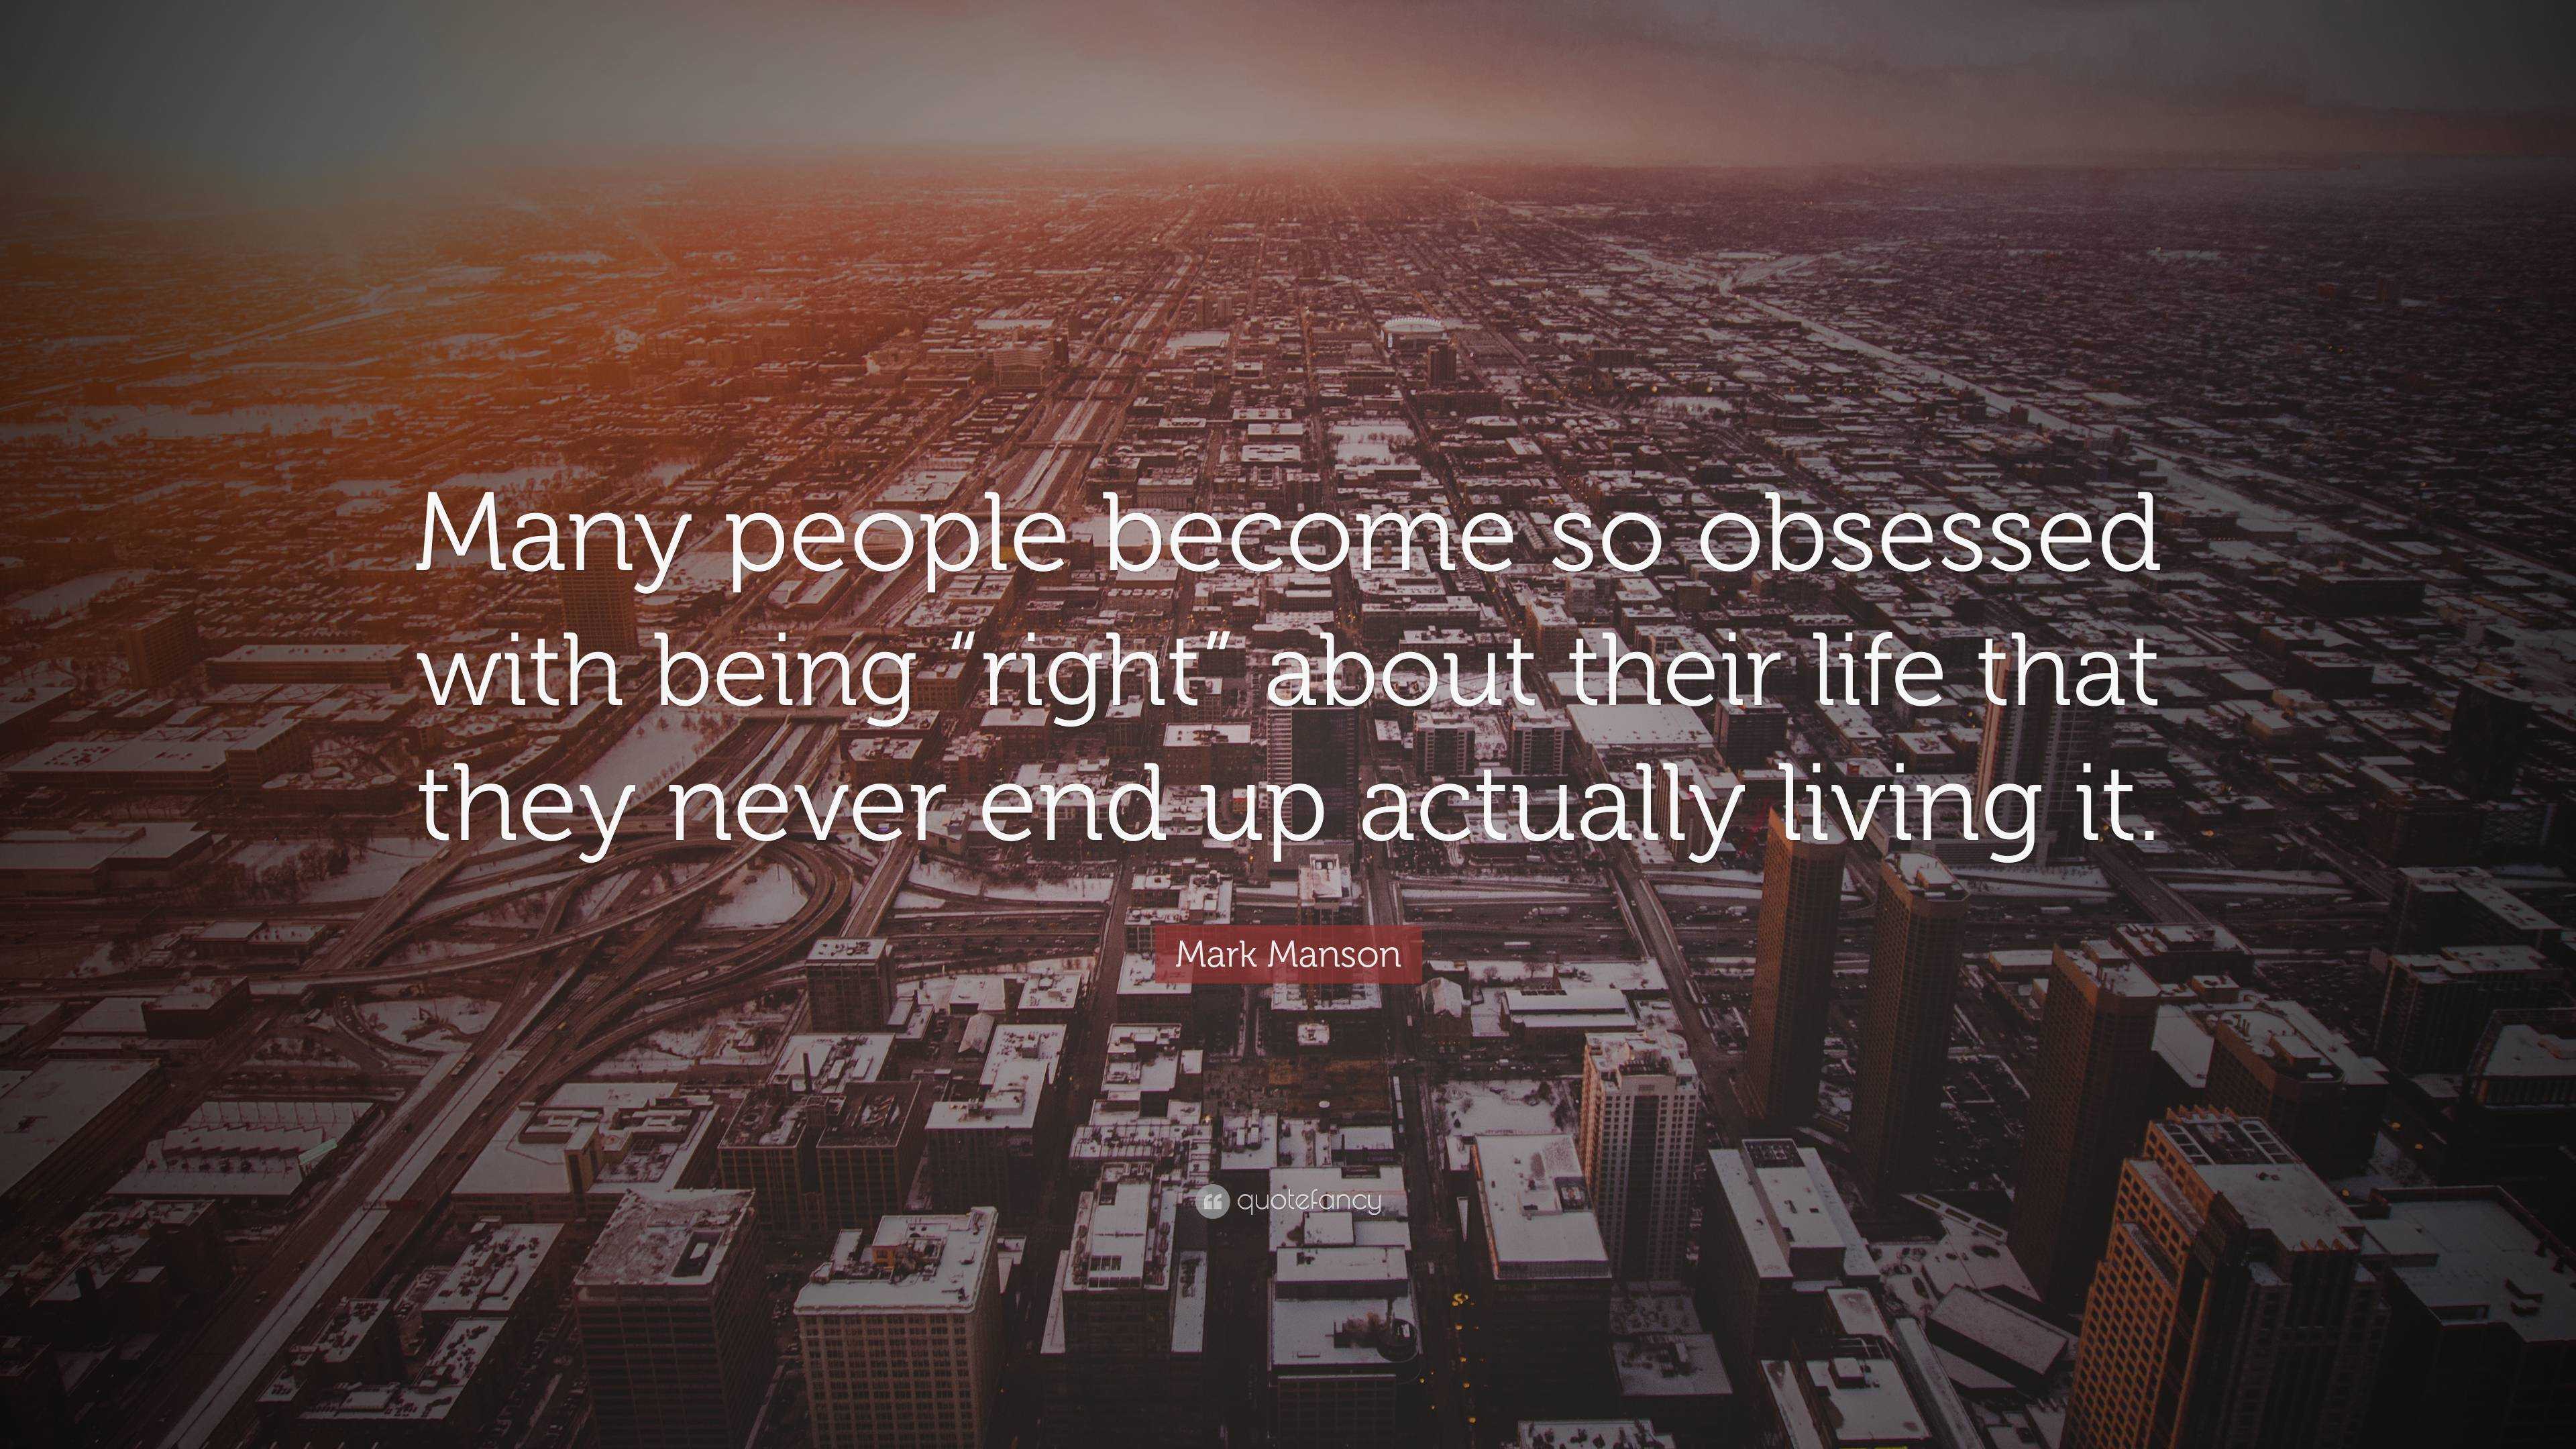 Mark Manson Quote: “Many people become so obsessed with being